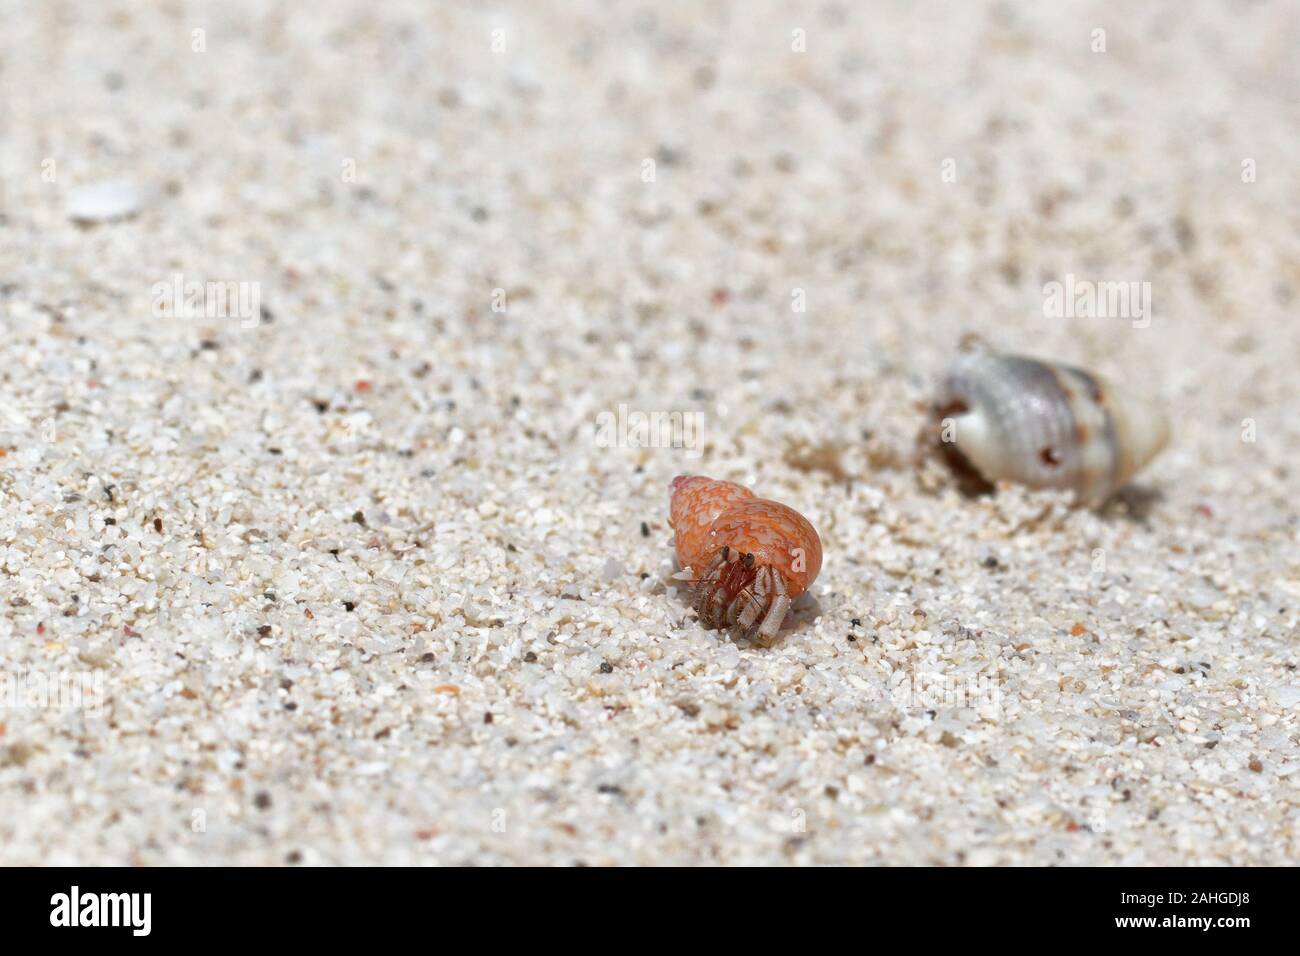 Beach wanderlust of the hermit crab in the stolen red shell Stock Photo